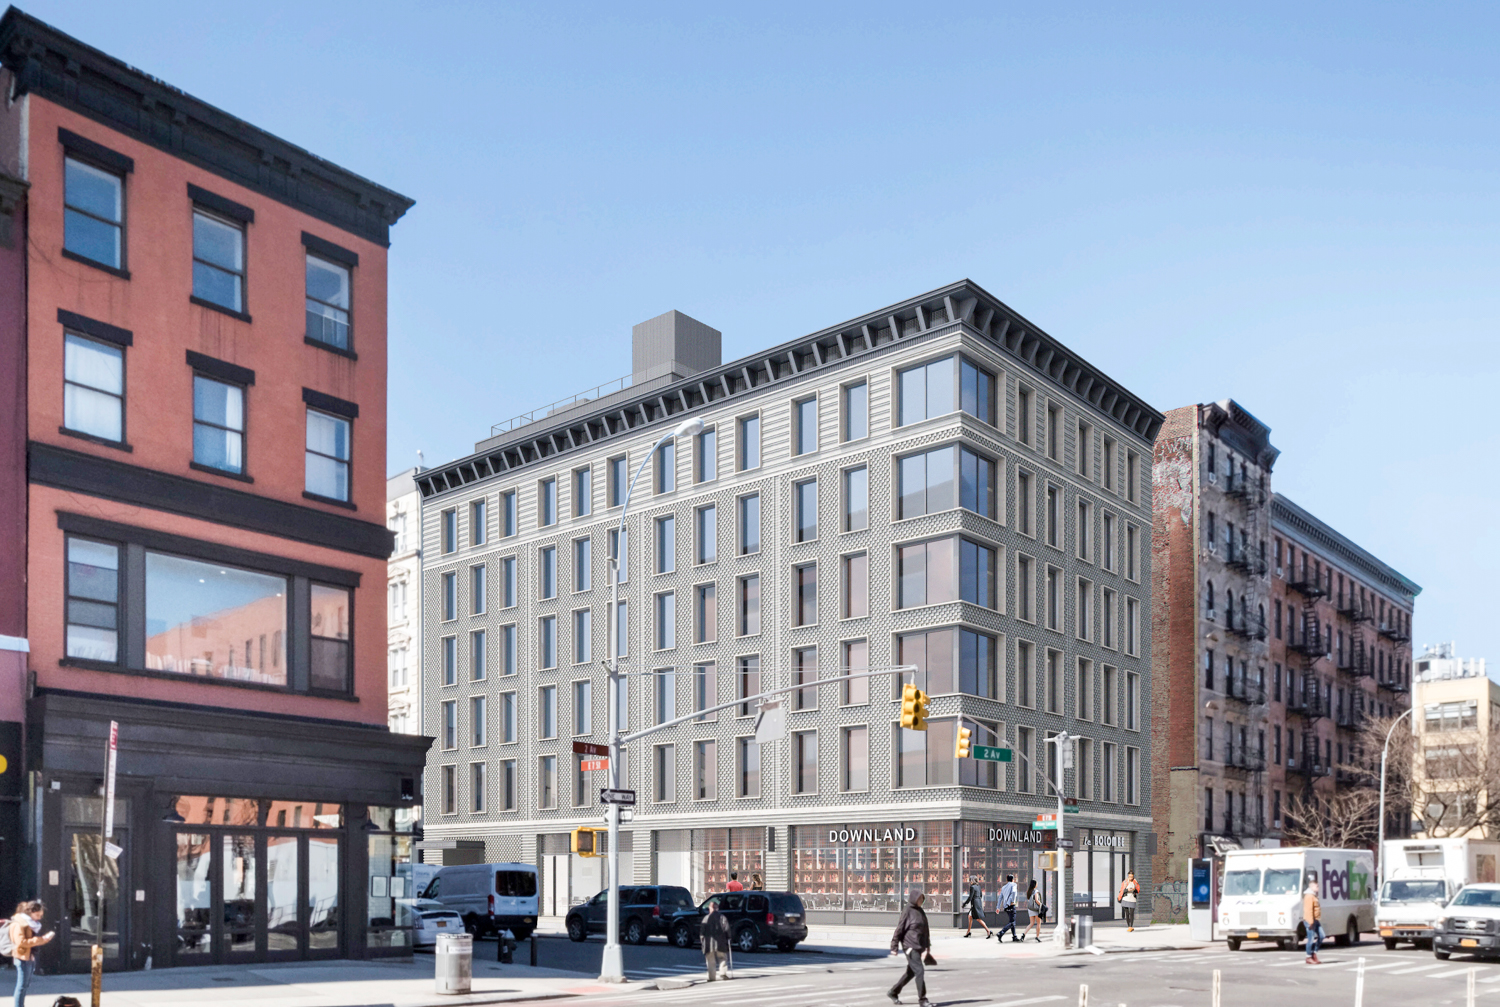 119-121 2nd Avenue, rendering by Morris Adjmi Architects